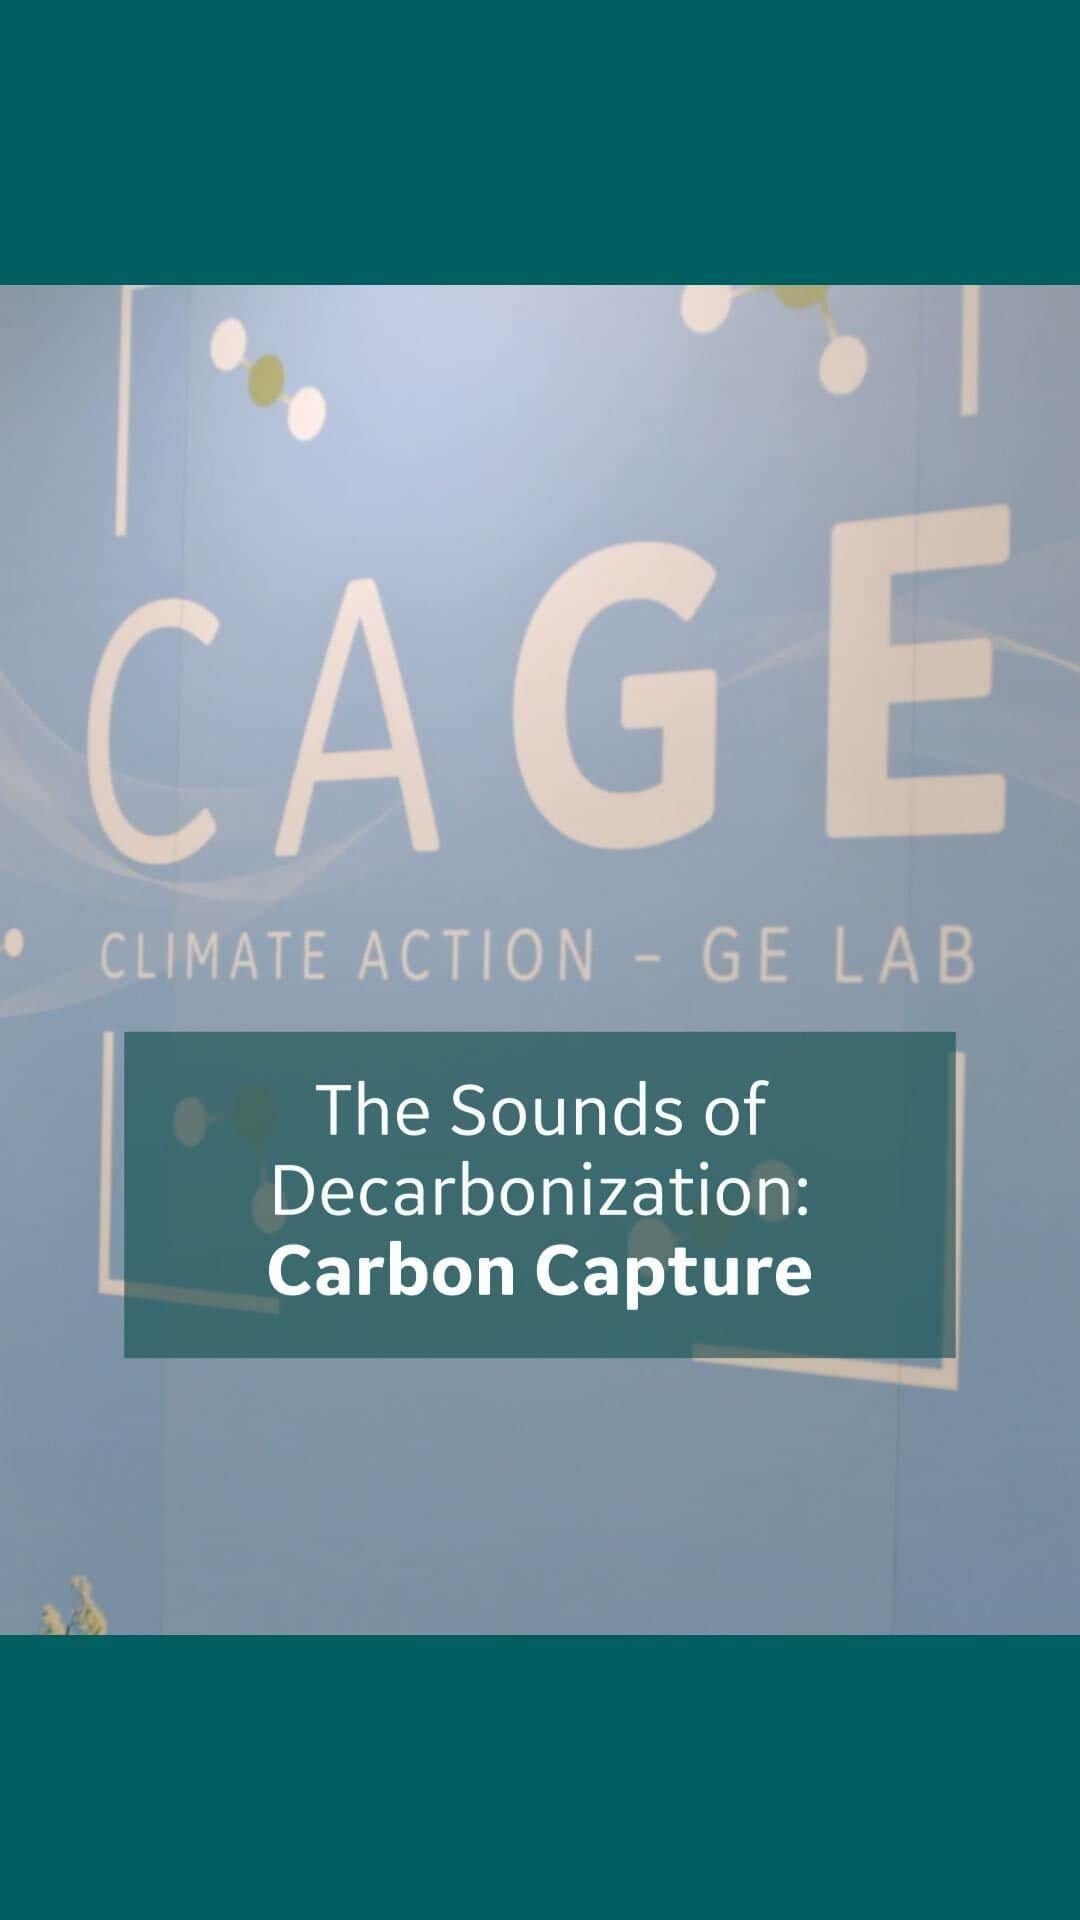 GeneralElectricのインスタグラム：「Lend your 👂ears👂 to the sounds of decarbonization, and learn how Carbon Capture is helping us build a more sustainable planet. #EarthWeek」